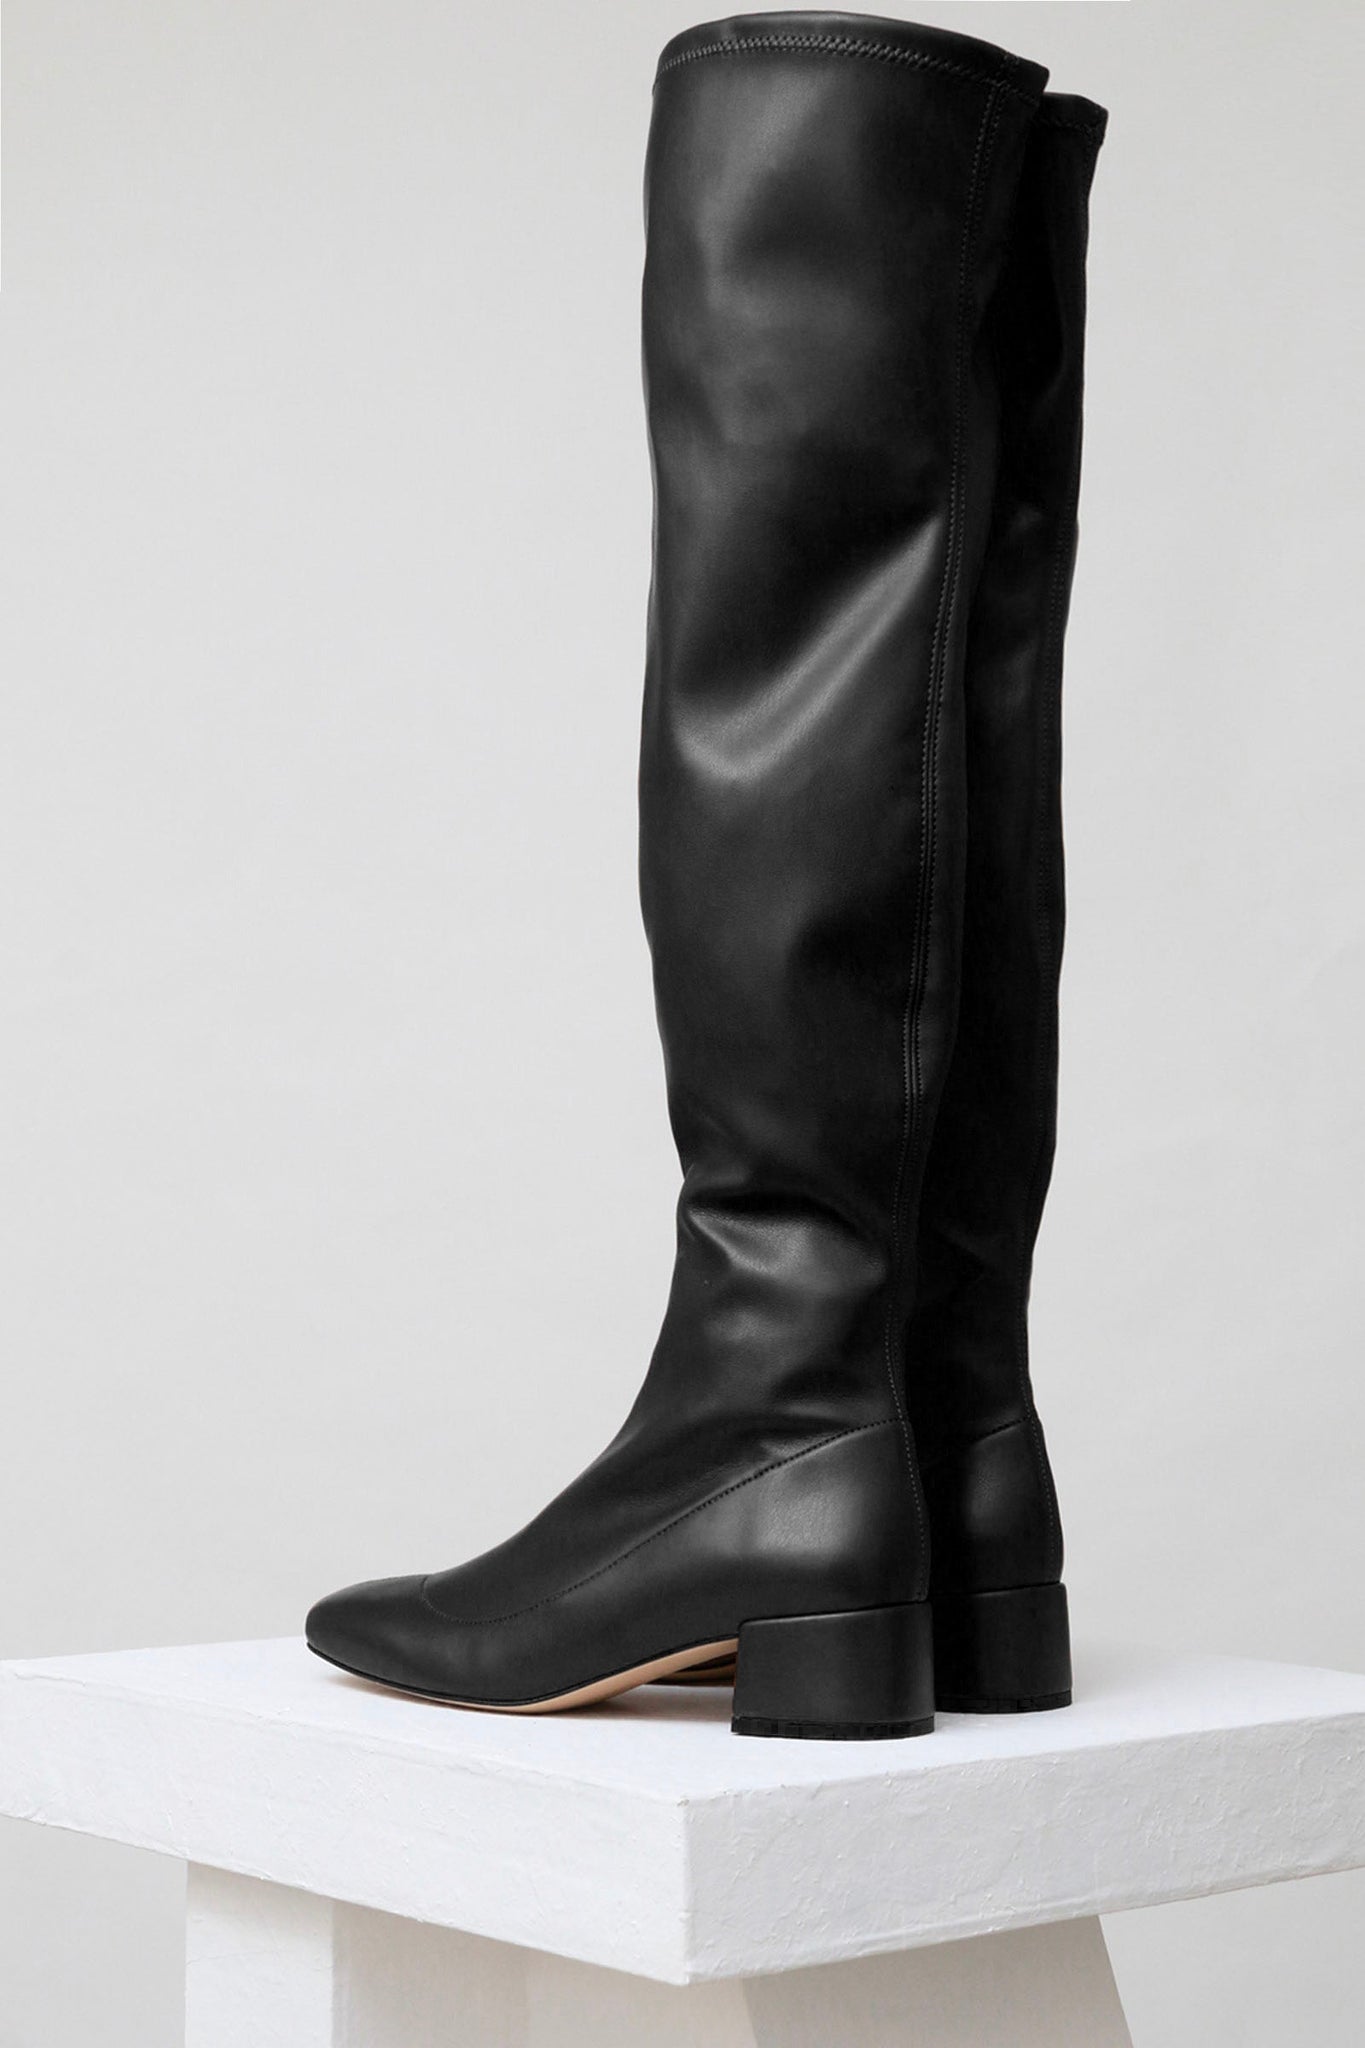 Souliers Martinez Shoes MONCLOA - Black Faux Stretch-Leather Thigh-High Boots 